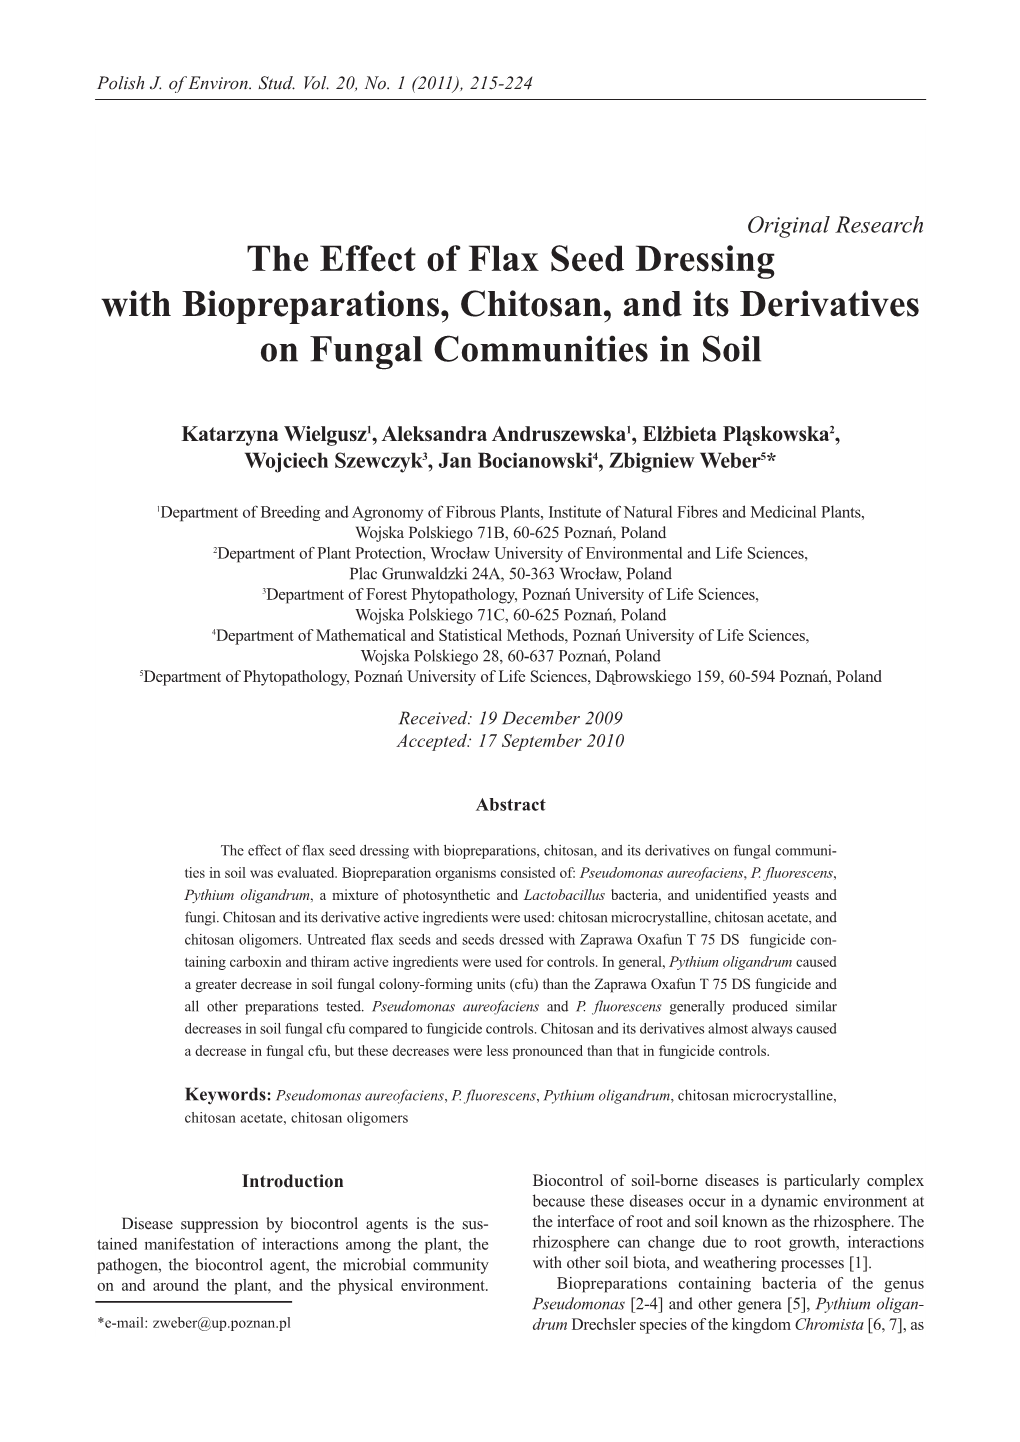 The Effect of Flax Seed Dressing with Biopreparations, Chitosan, and Its Derivatives on Fungal Communities in Soil